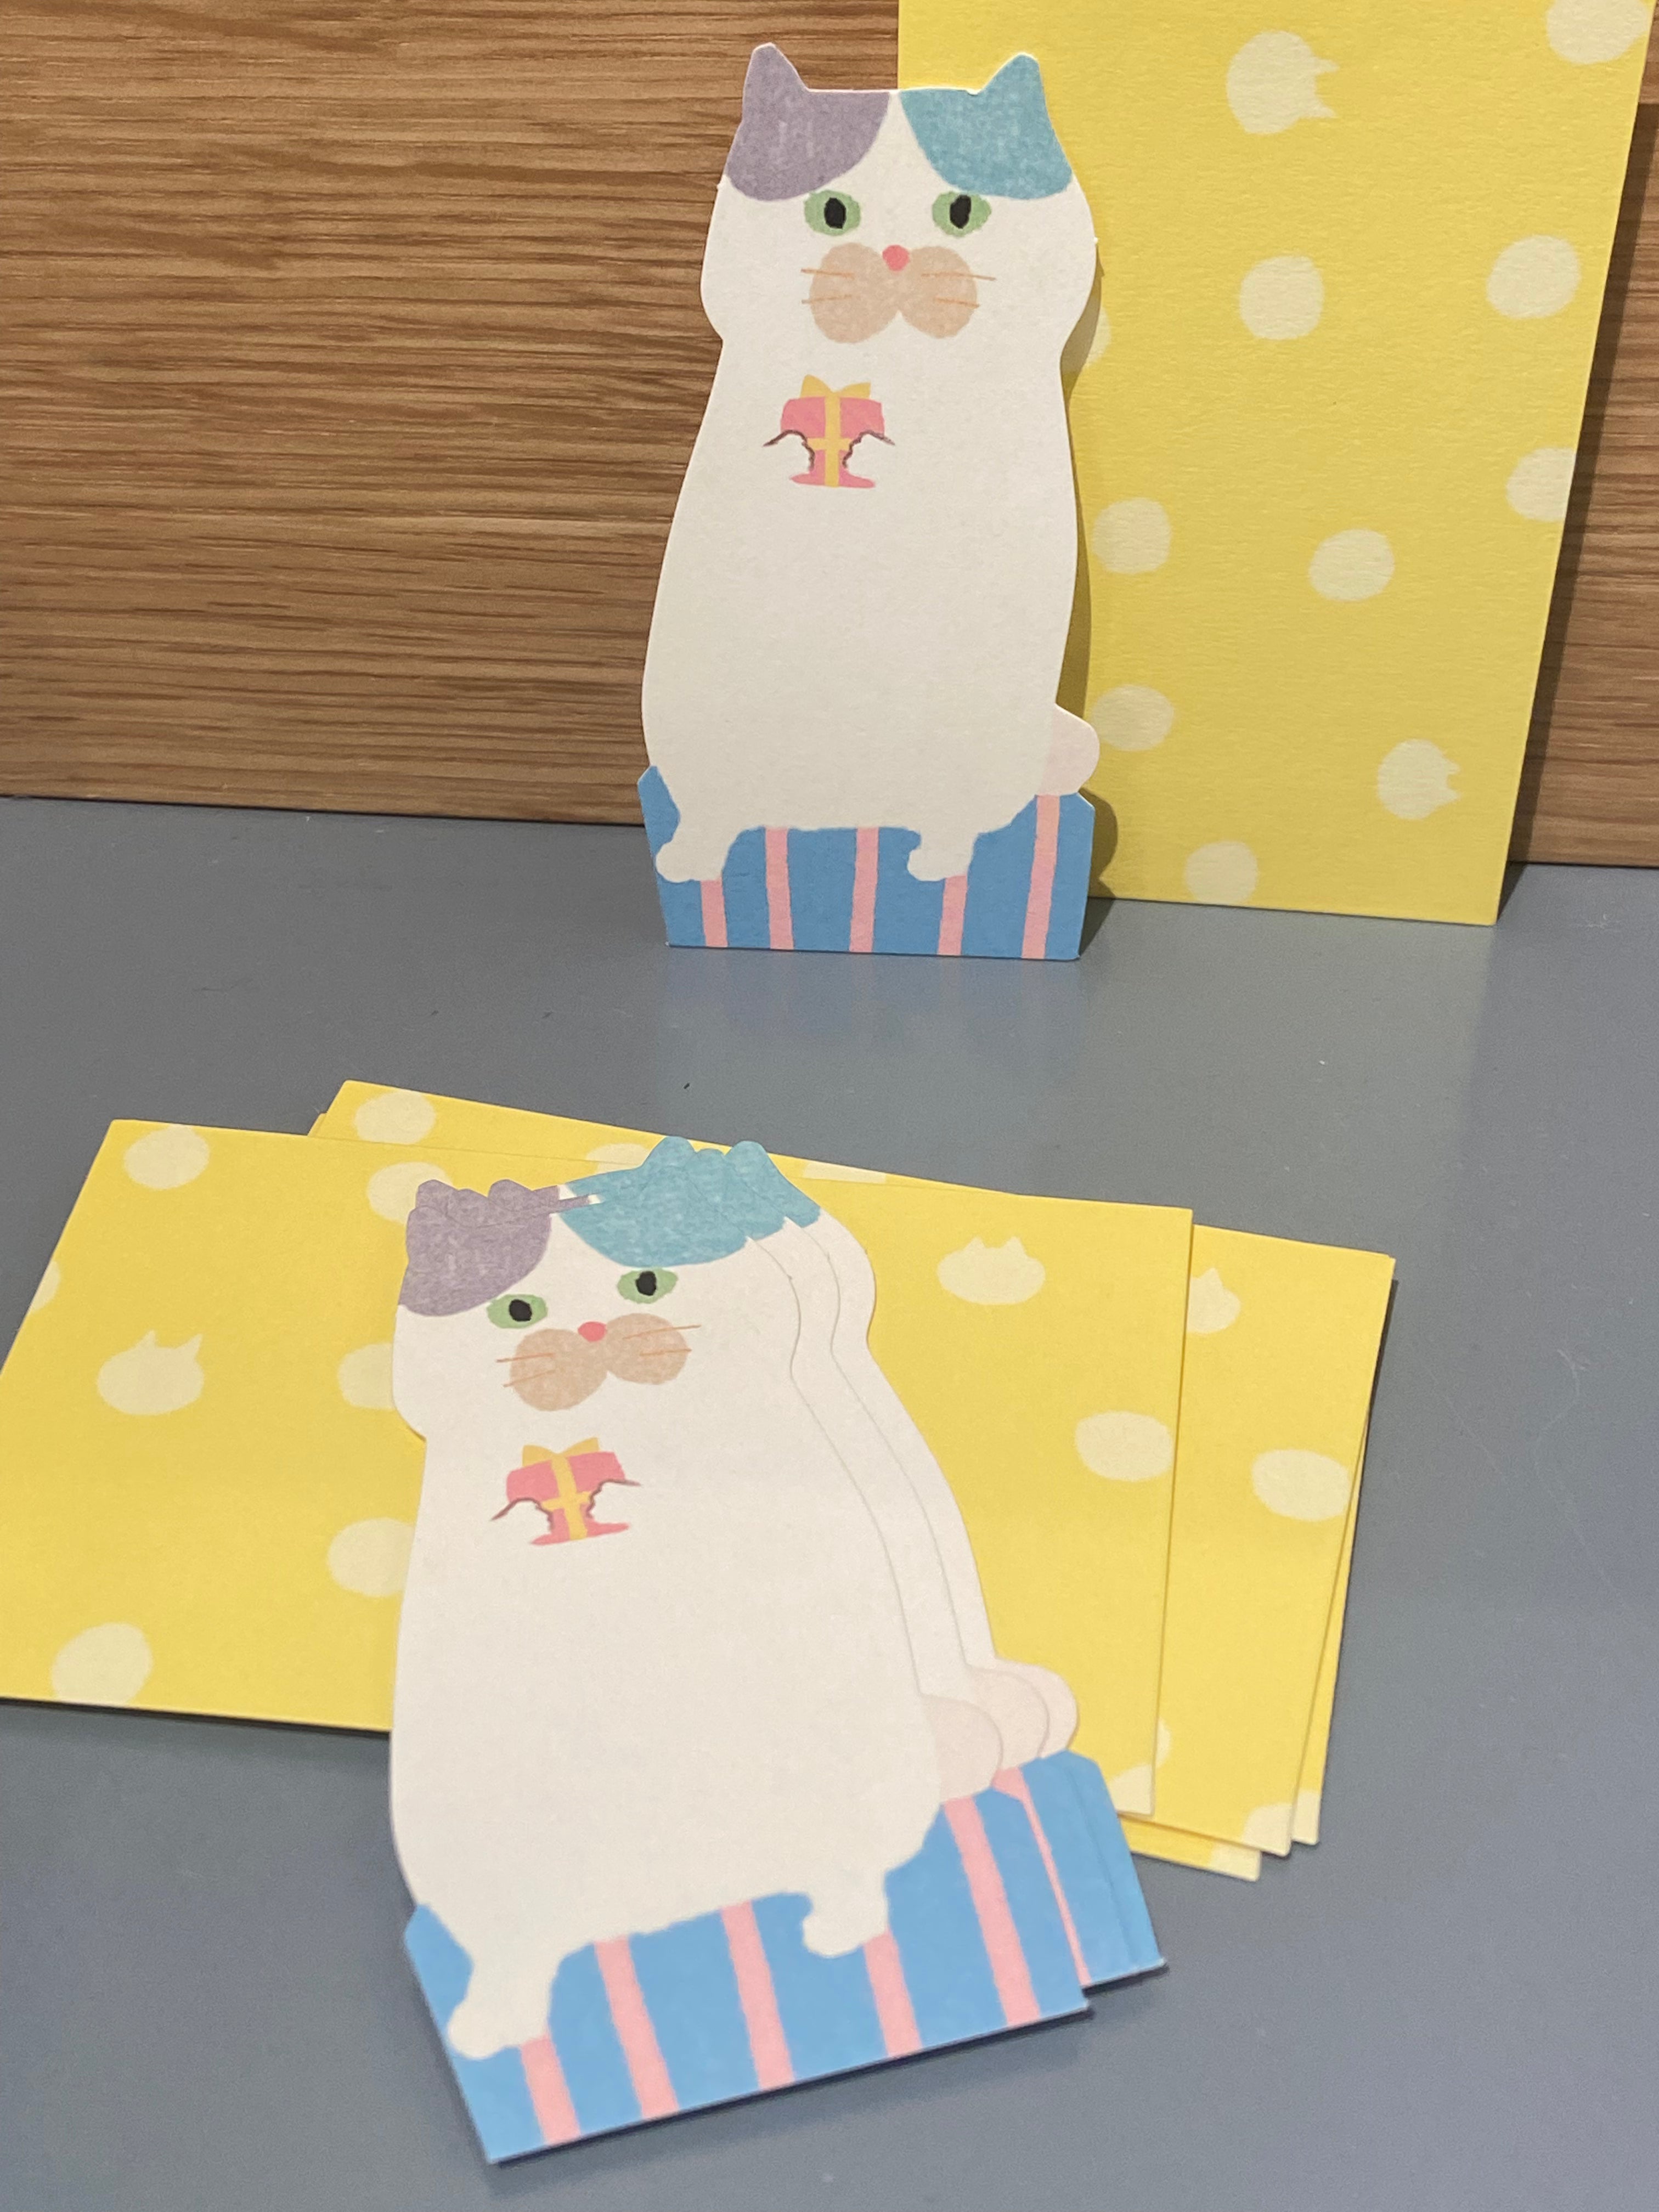 Set of 5 small cards + yellow envelopes, white cat